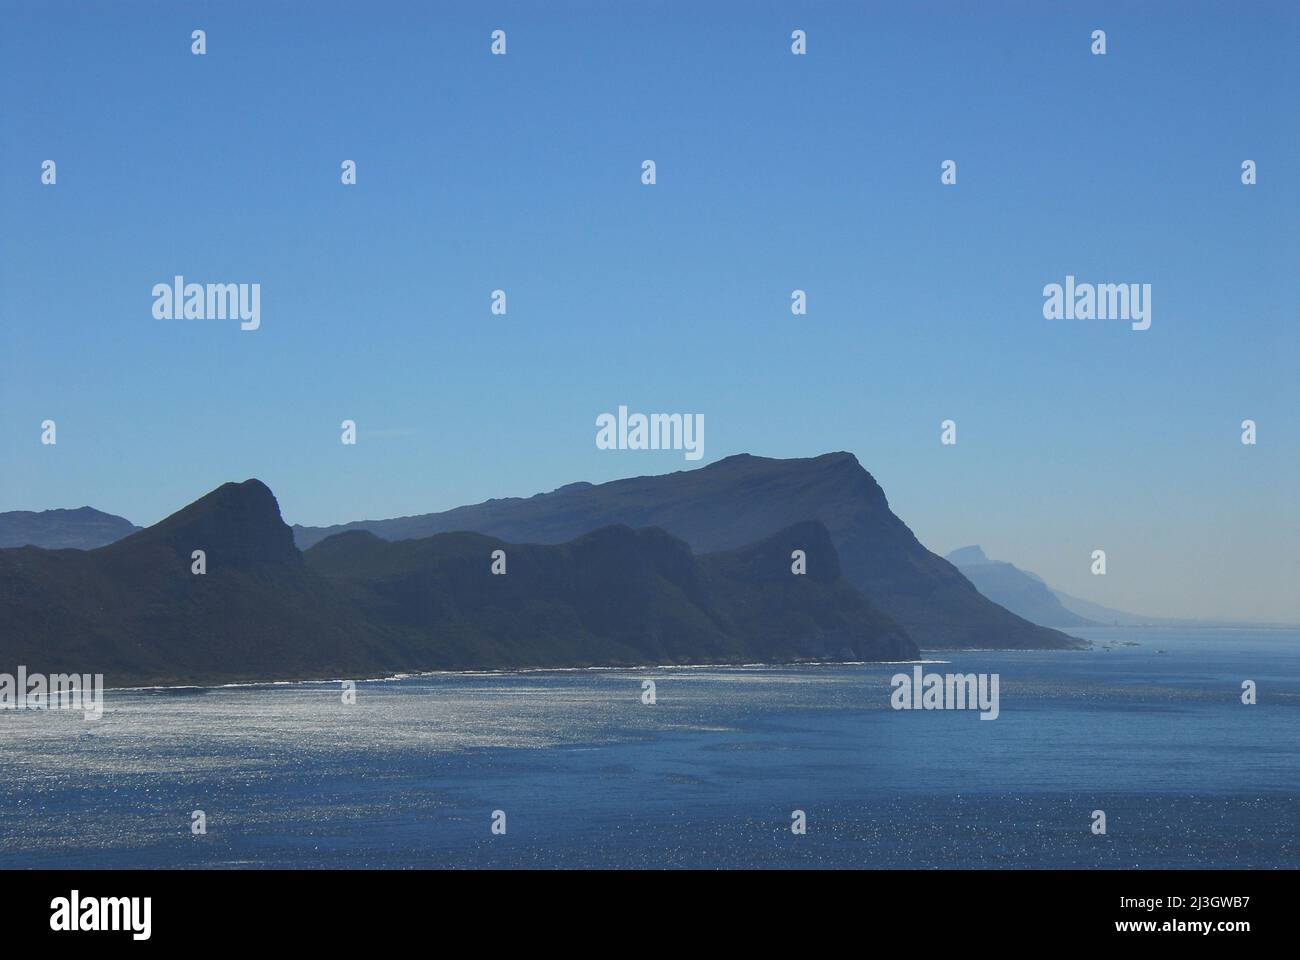 A misty day creates a beautiful panorama of abstract mountain shapes along the coastline of the Cape Peninsula in South Africa. Stock Photo